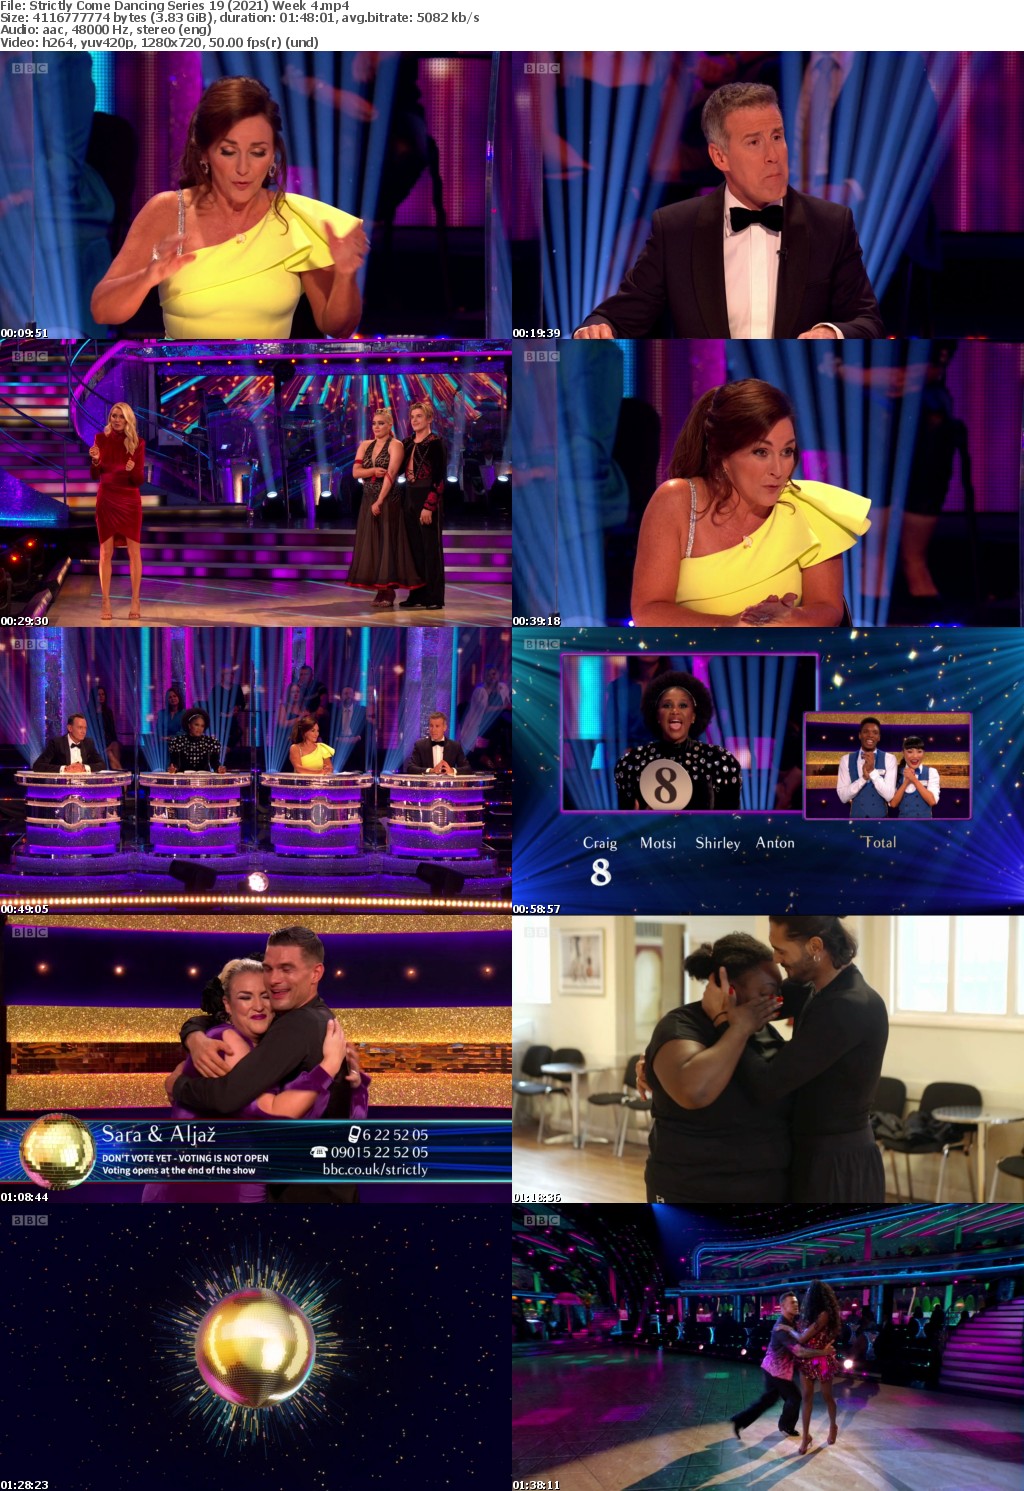 Strictly Come Dancing Series 19 (2021) Week 4 (1280x720p HD, 50fps, soft Eng subs)